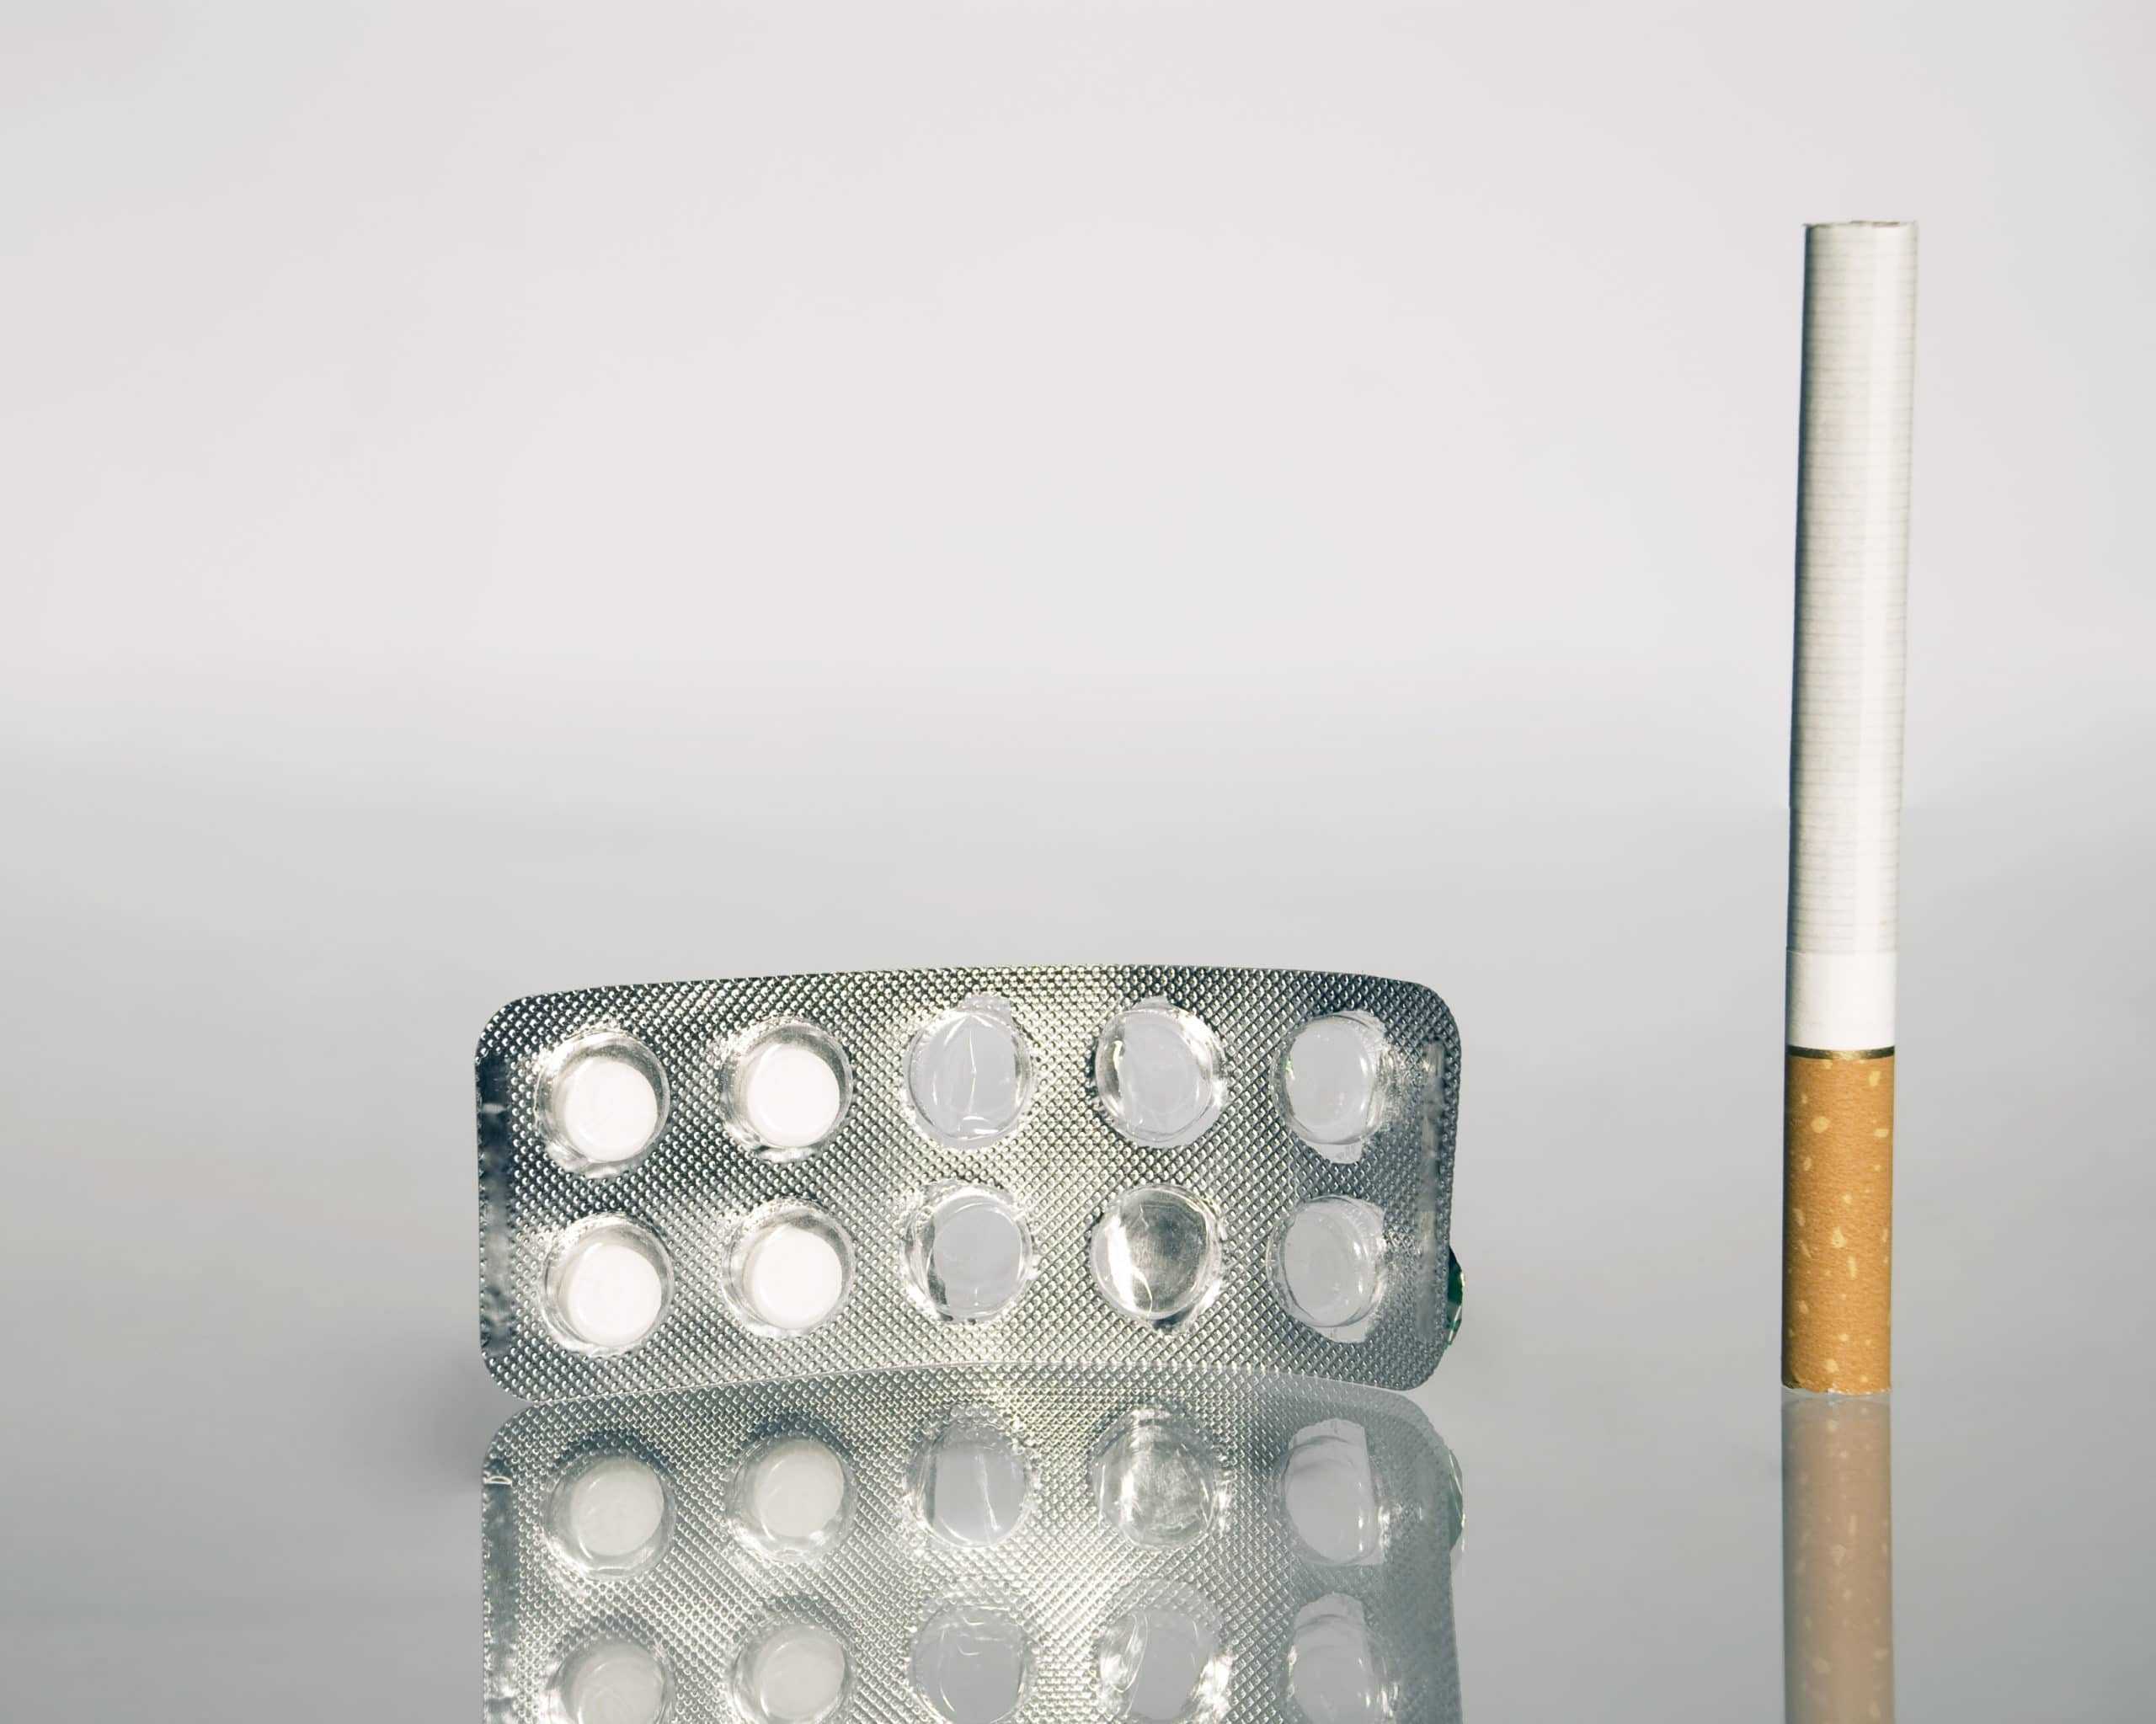 How to quit smoking pills